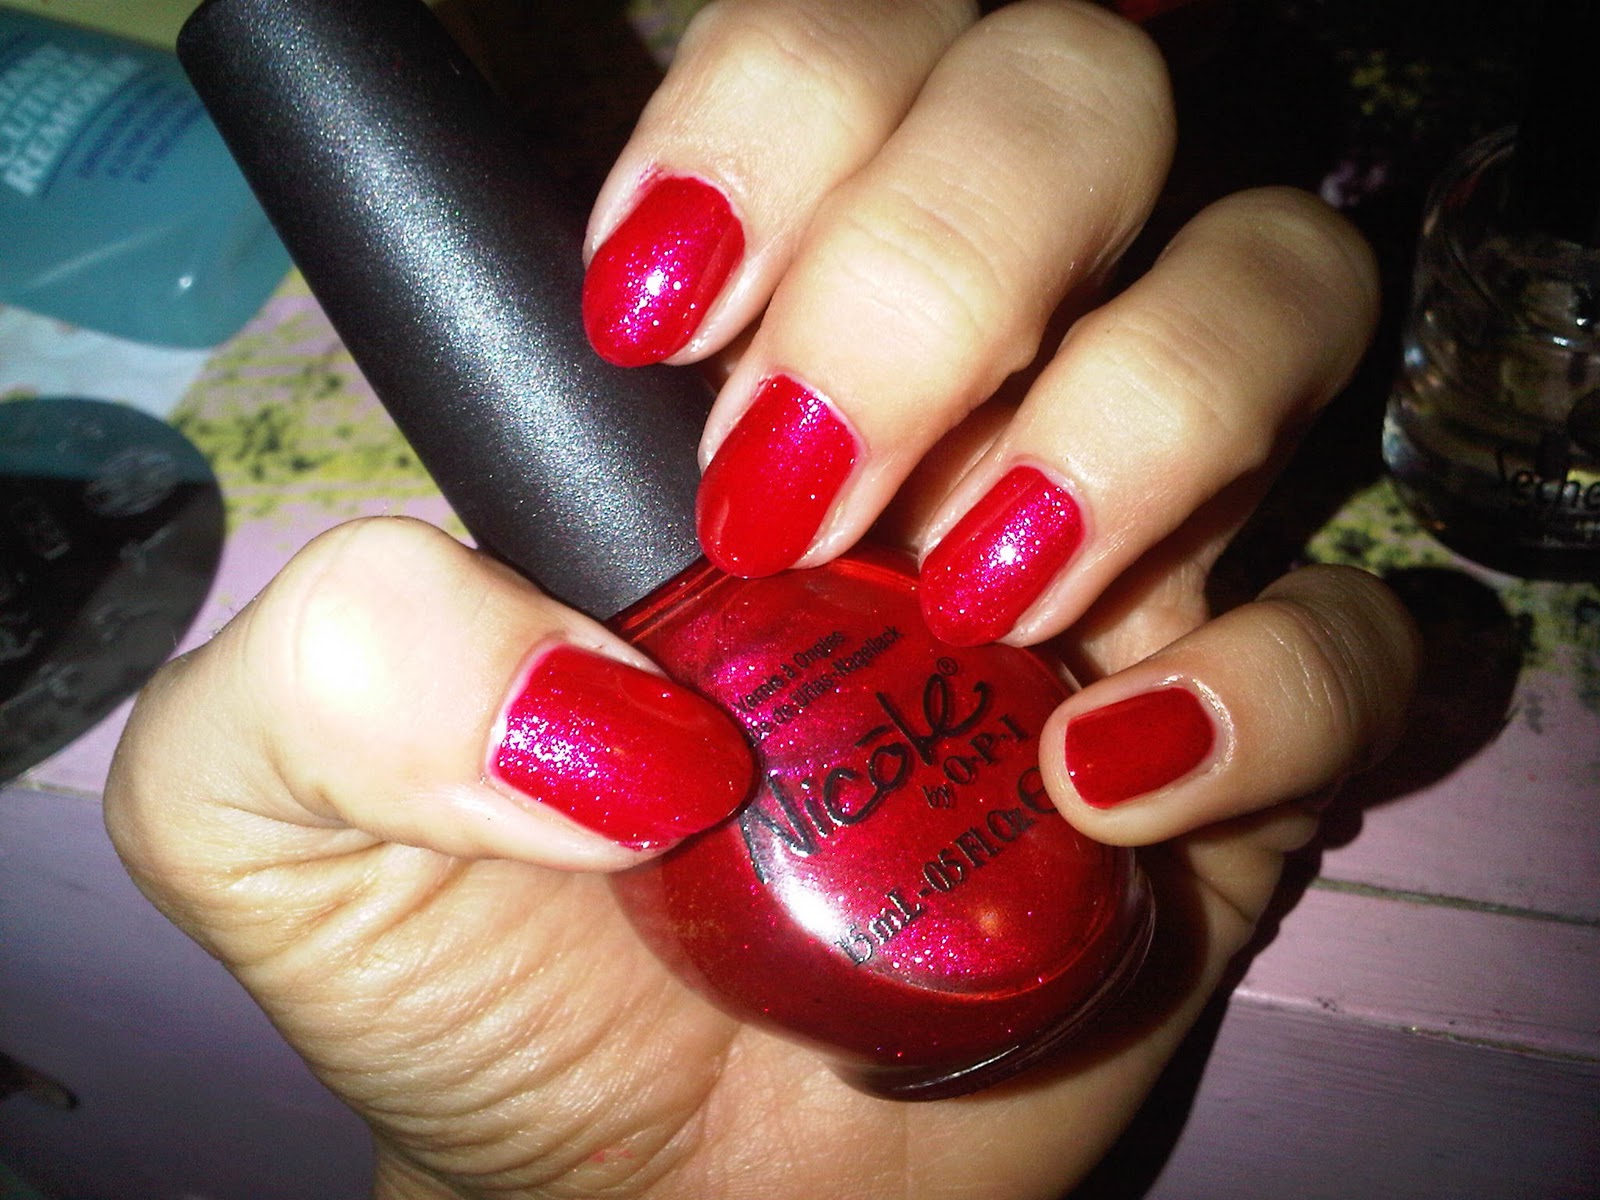 5. China Glaze Nail Lacquer in "Rose Among Thorns" - wide 8